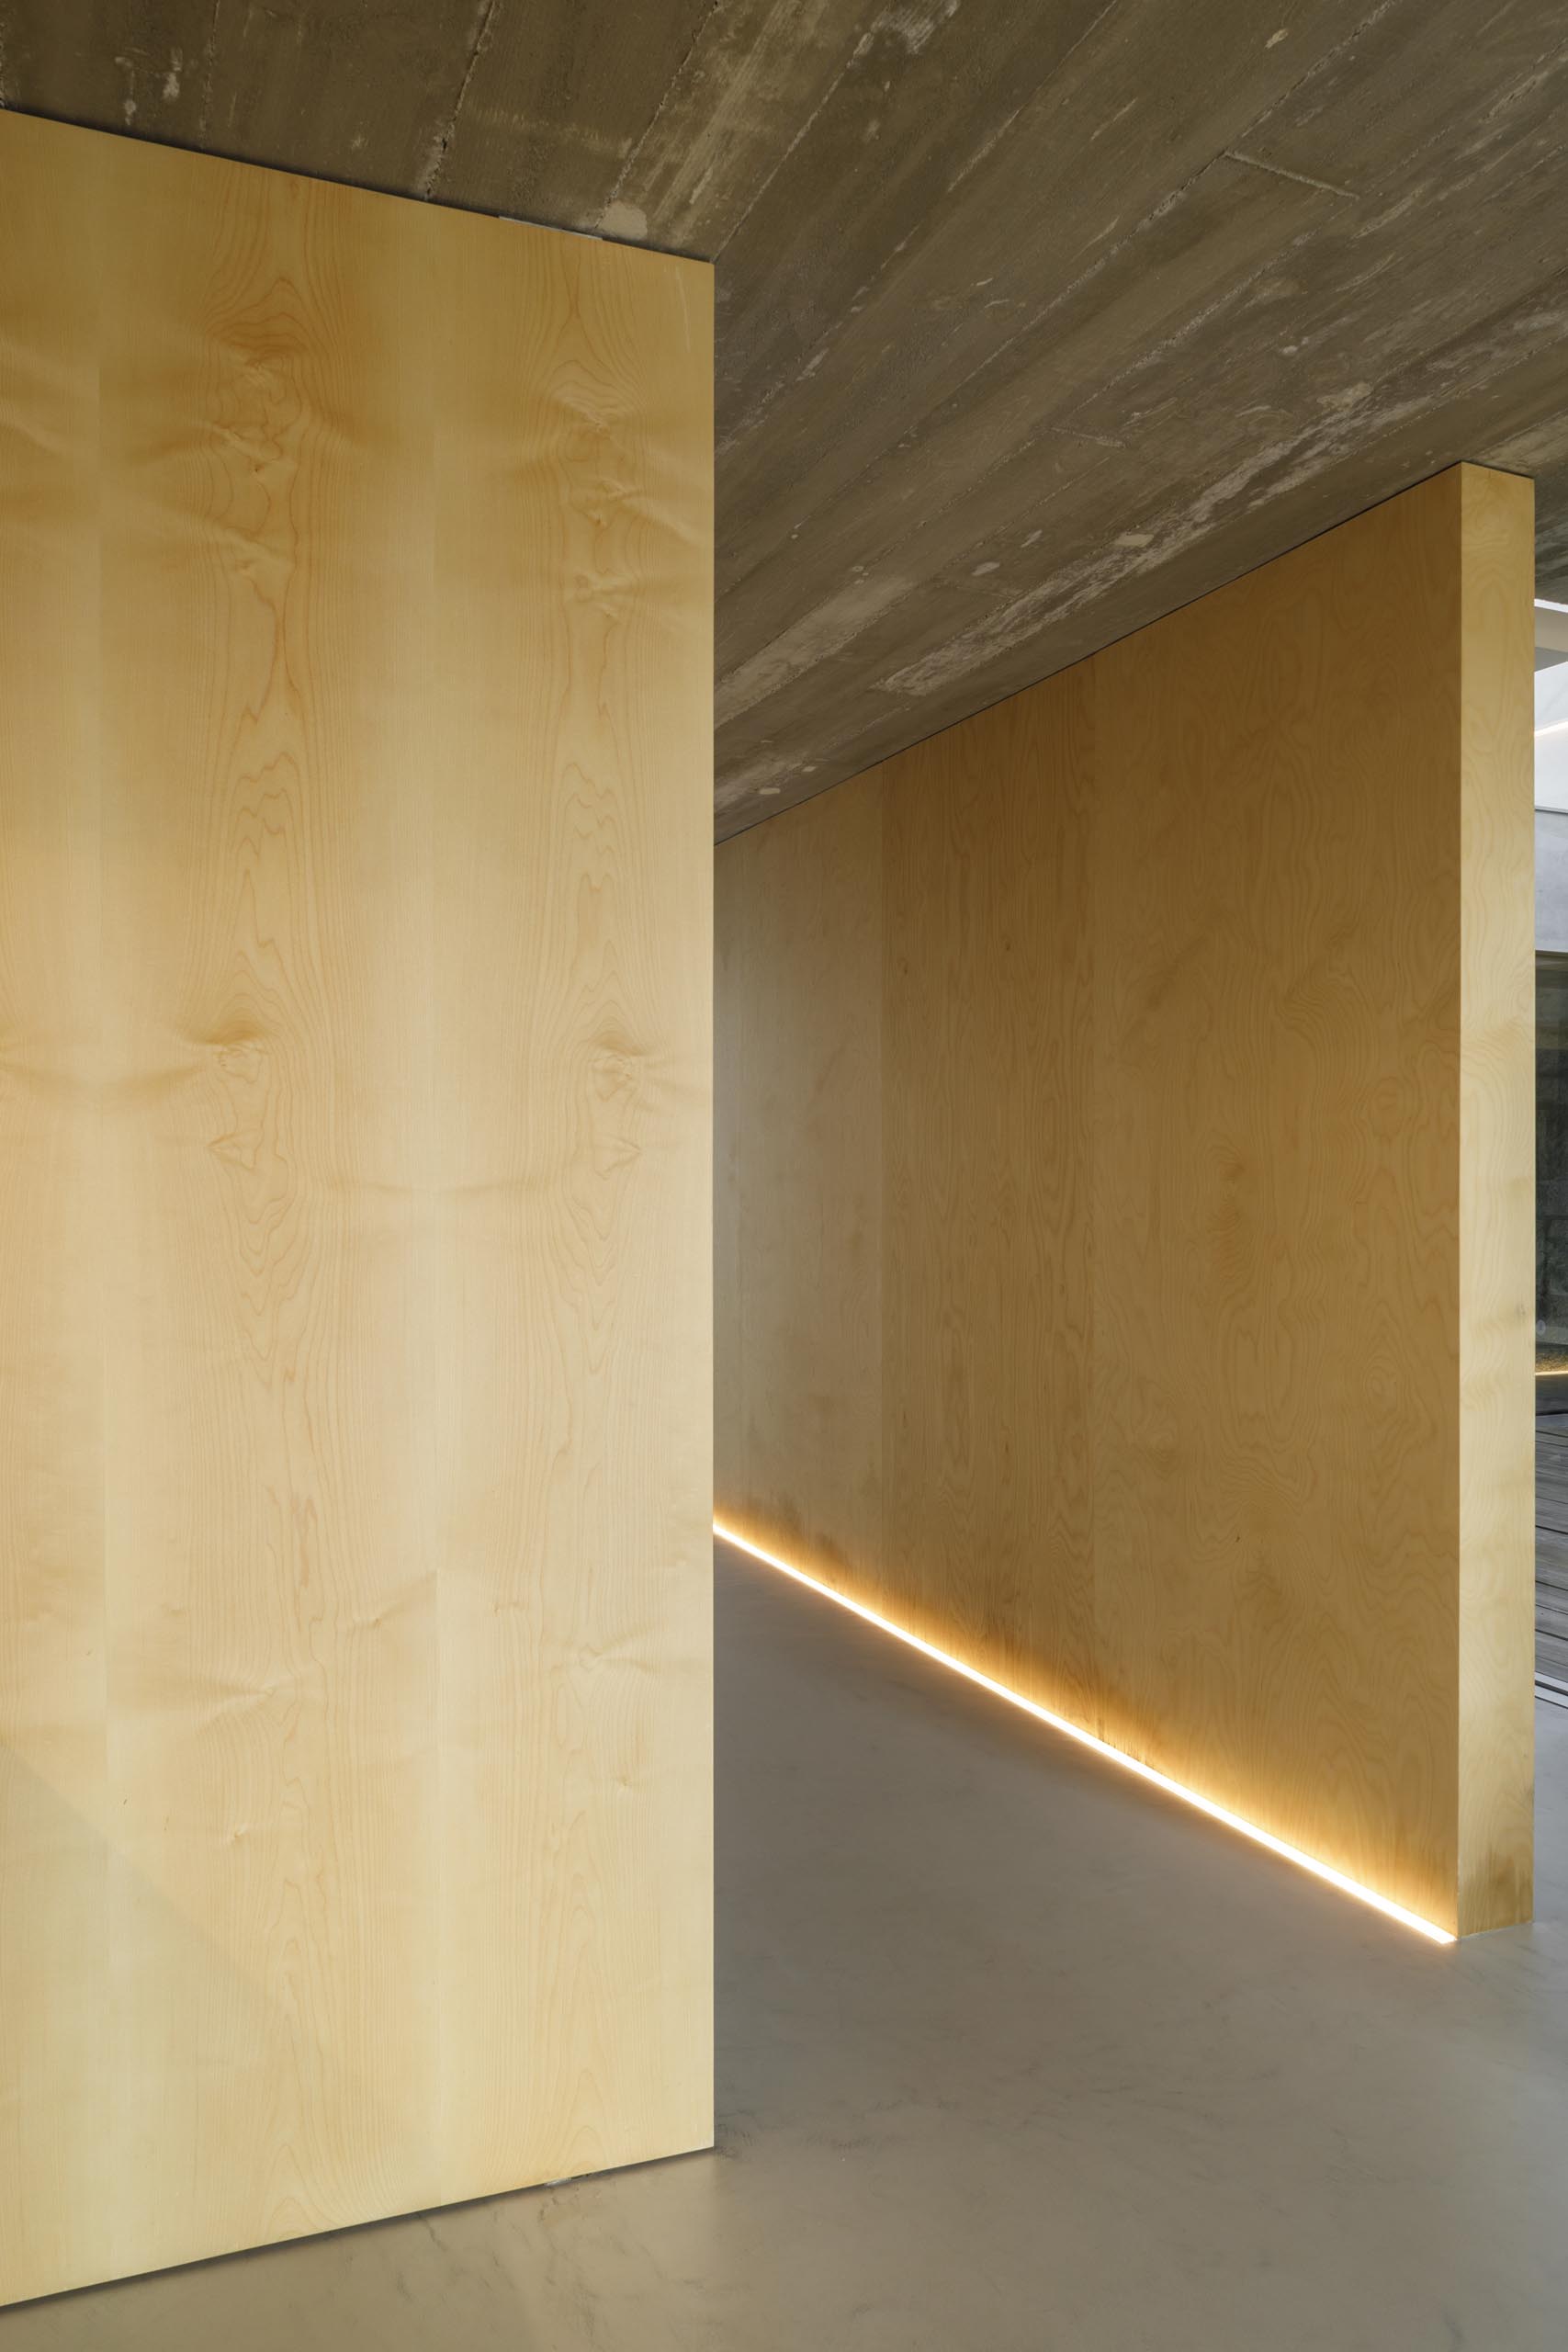 A hallway with wood walls is illuminated by LED lighting on the floor.